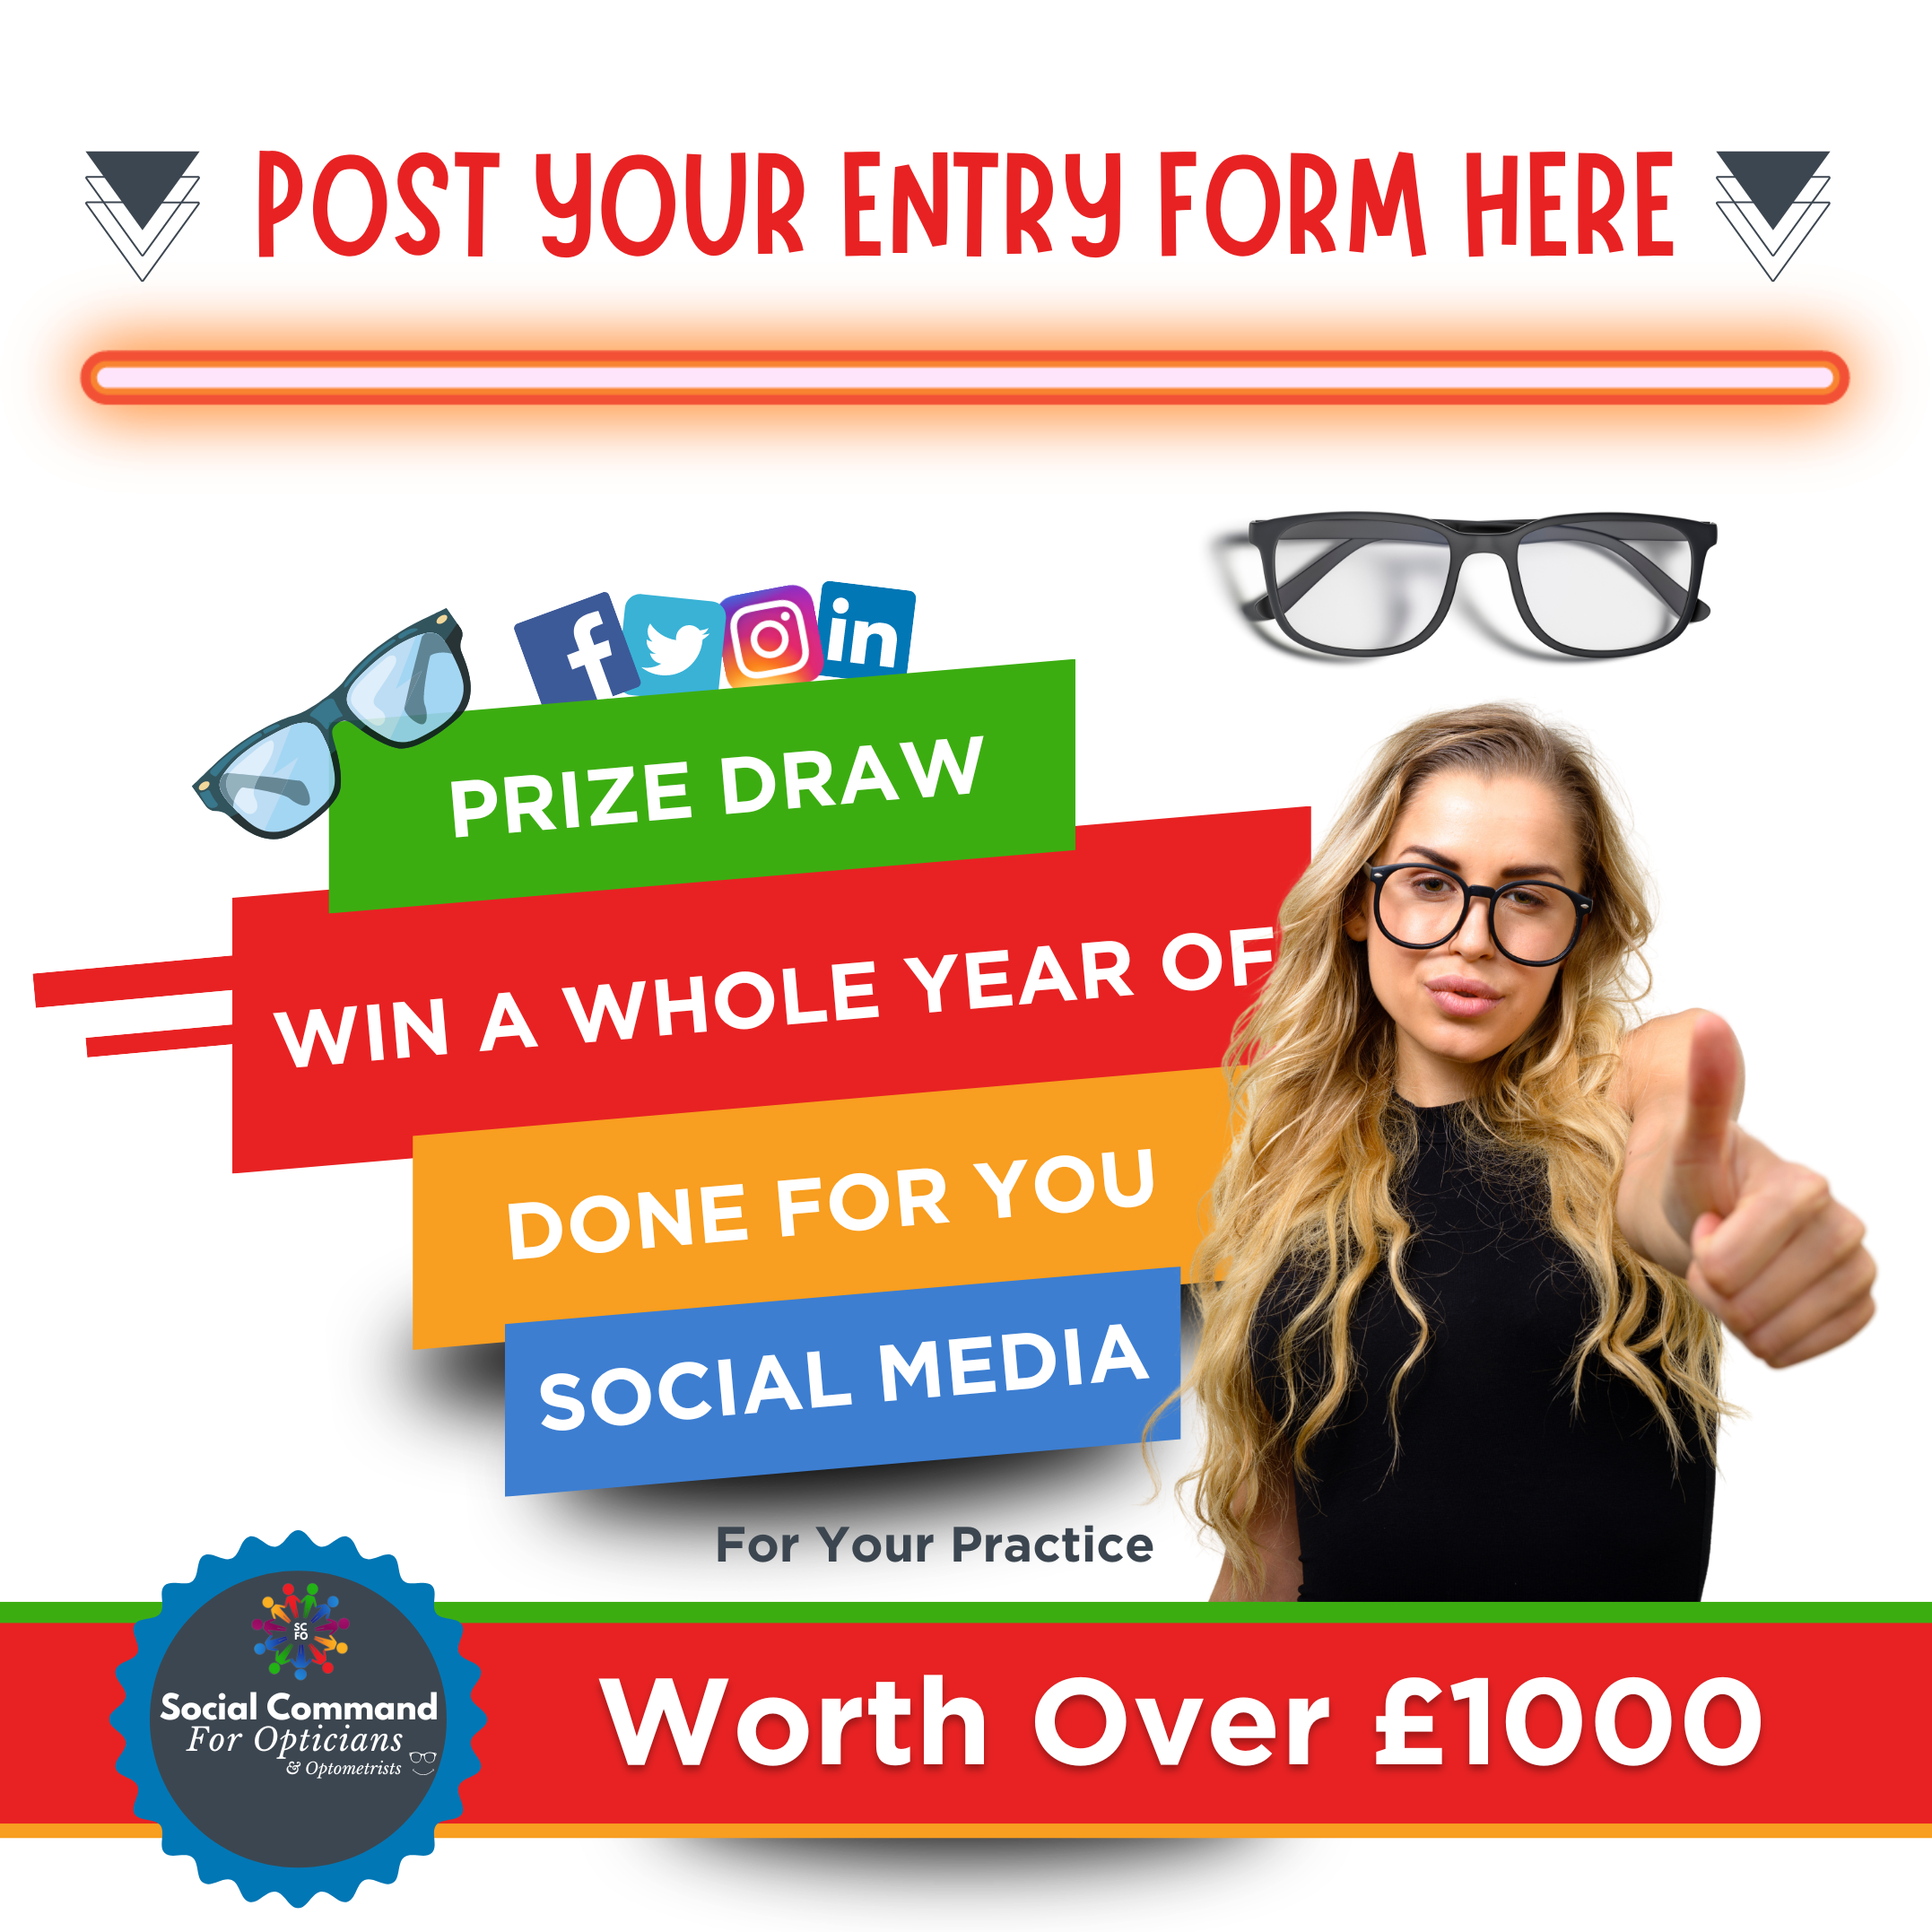 Win a years worth of FREE done-for-you Social Media posted EVERY DAY for a year!